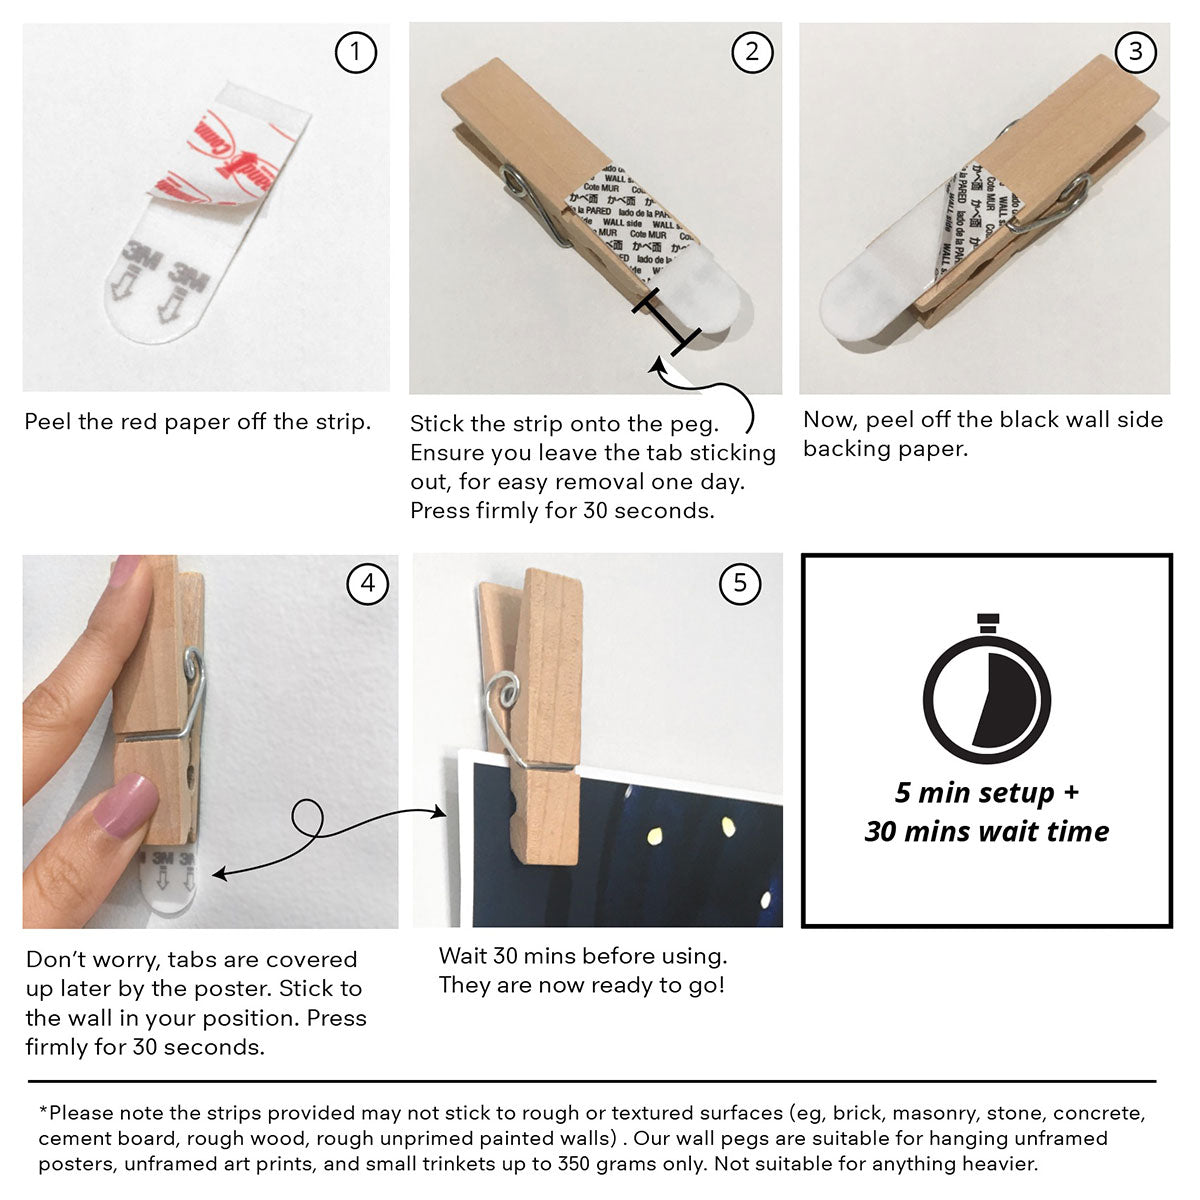 Spring Clips or Wood Wall Pegs Installtion Instructions - easy to follow step by step.